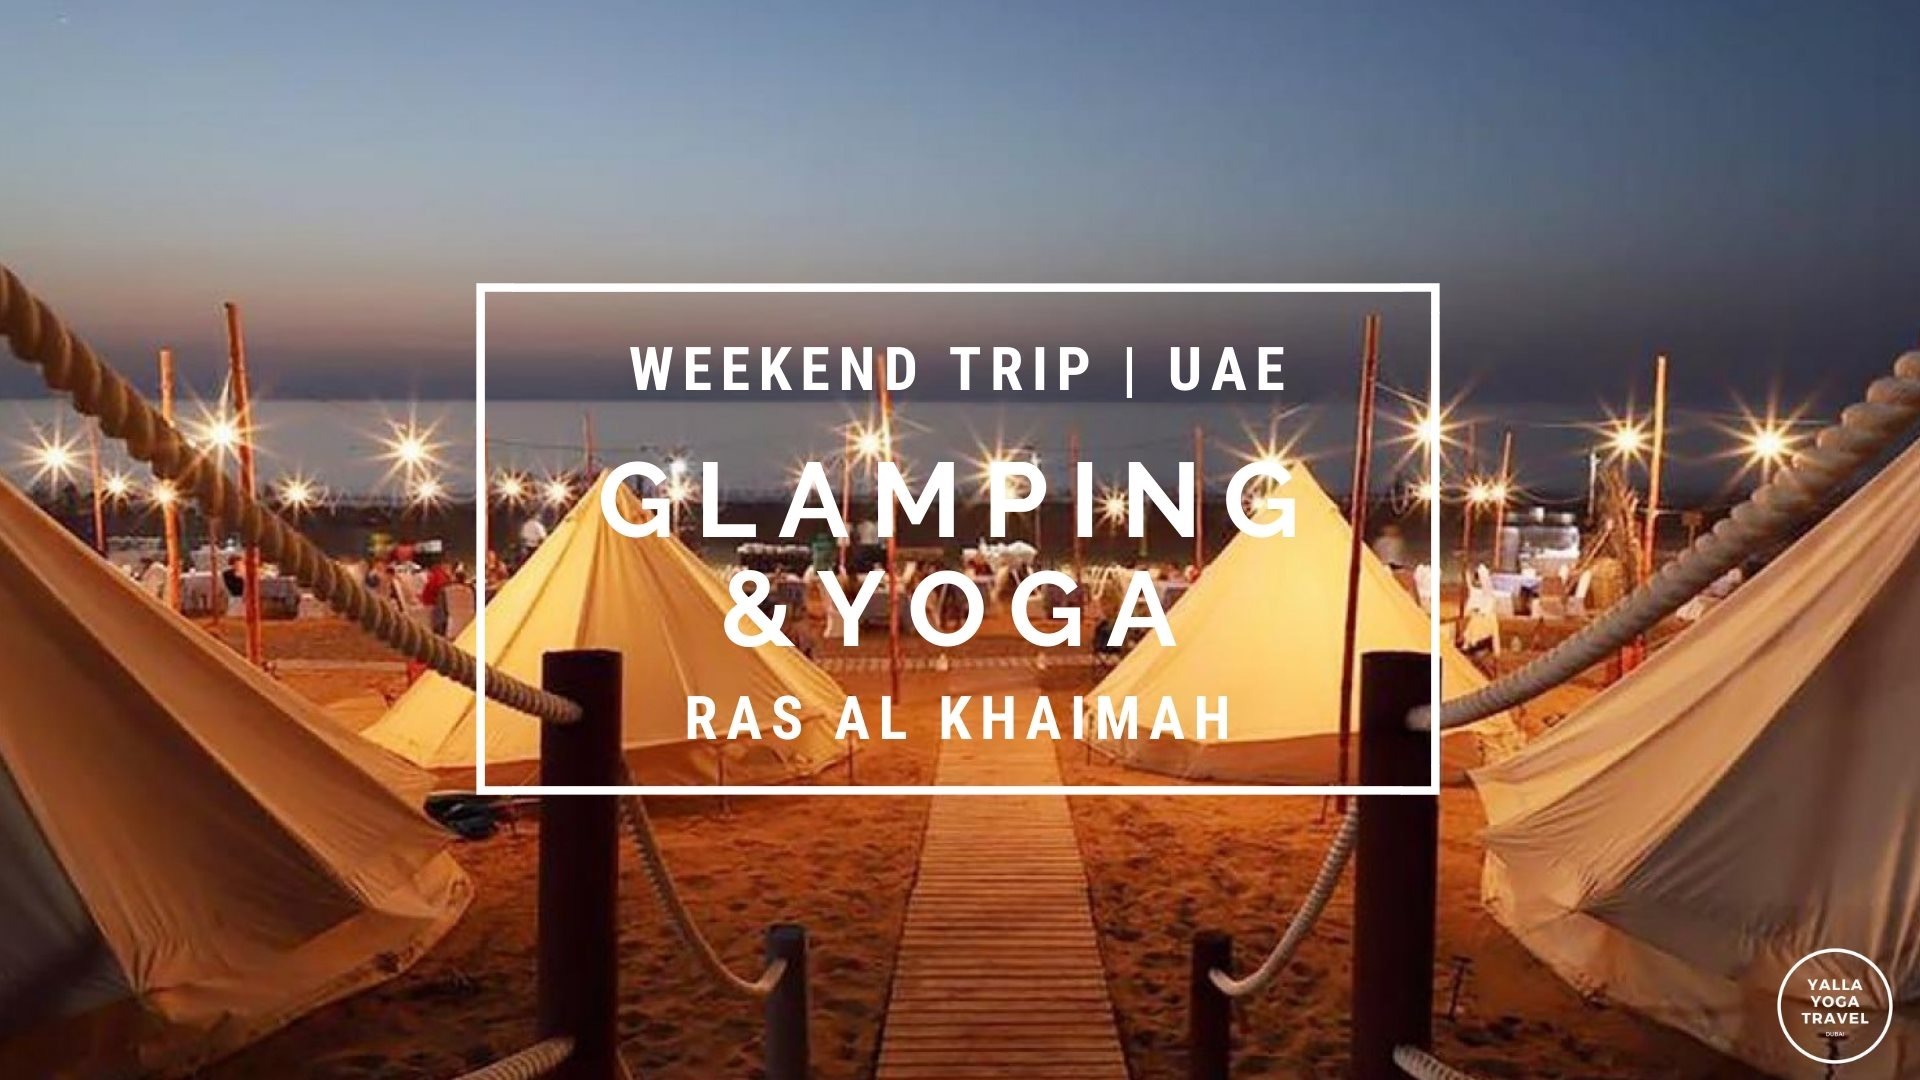 Glamping and Yoga Experience at RAK - Coming Soon in UAE